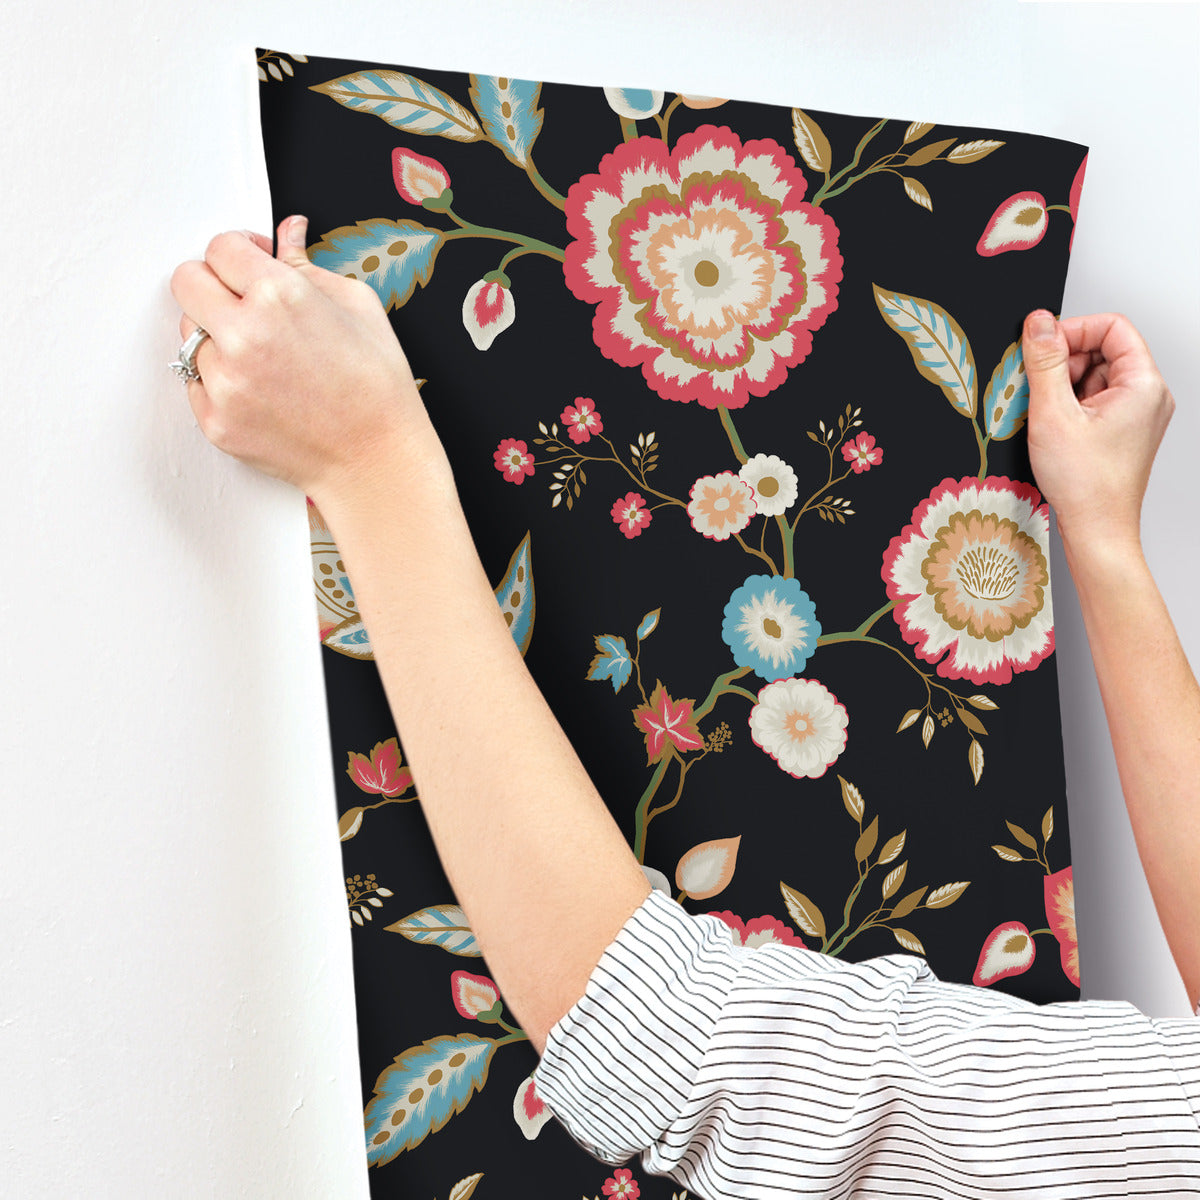 A person wearing a striped long-sleeve shirt is hanging a sheet of Dahlia Blooms Midnight/Multi Wallpaper Black, Pink (60 Sq.Ft.) by York Wallcoverings. The wallpaper features a black background adorned with colorful flowers in shades of red, pink, white, and blue, along with green leaves and stems. The easy installation and removal make it perfect for adding botanical elegance to any room.